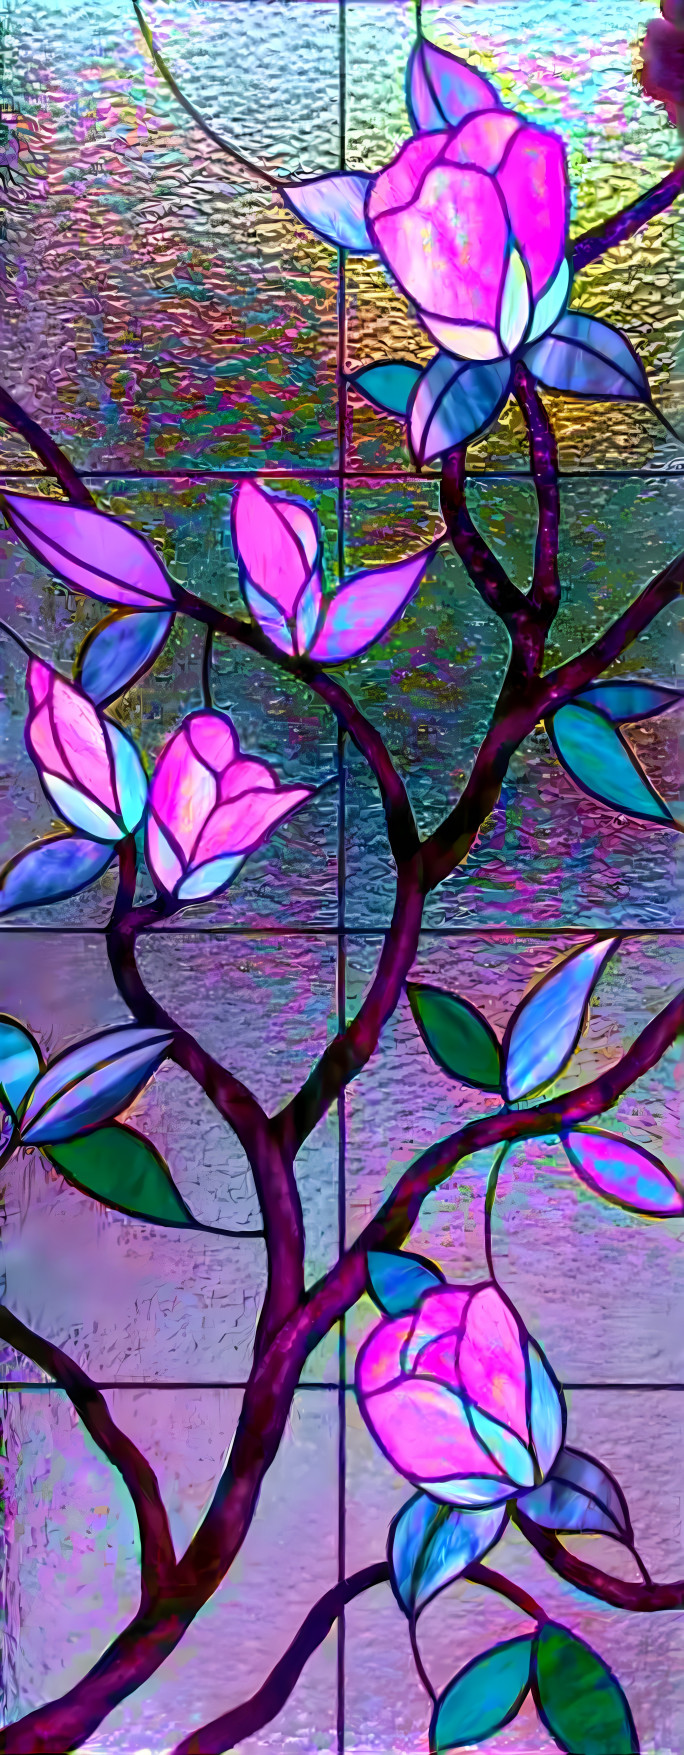 Pink, blue, and gold stained glass